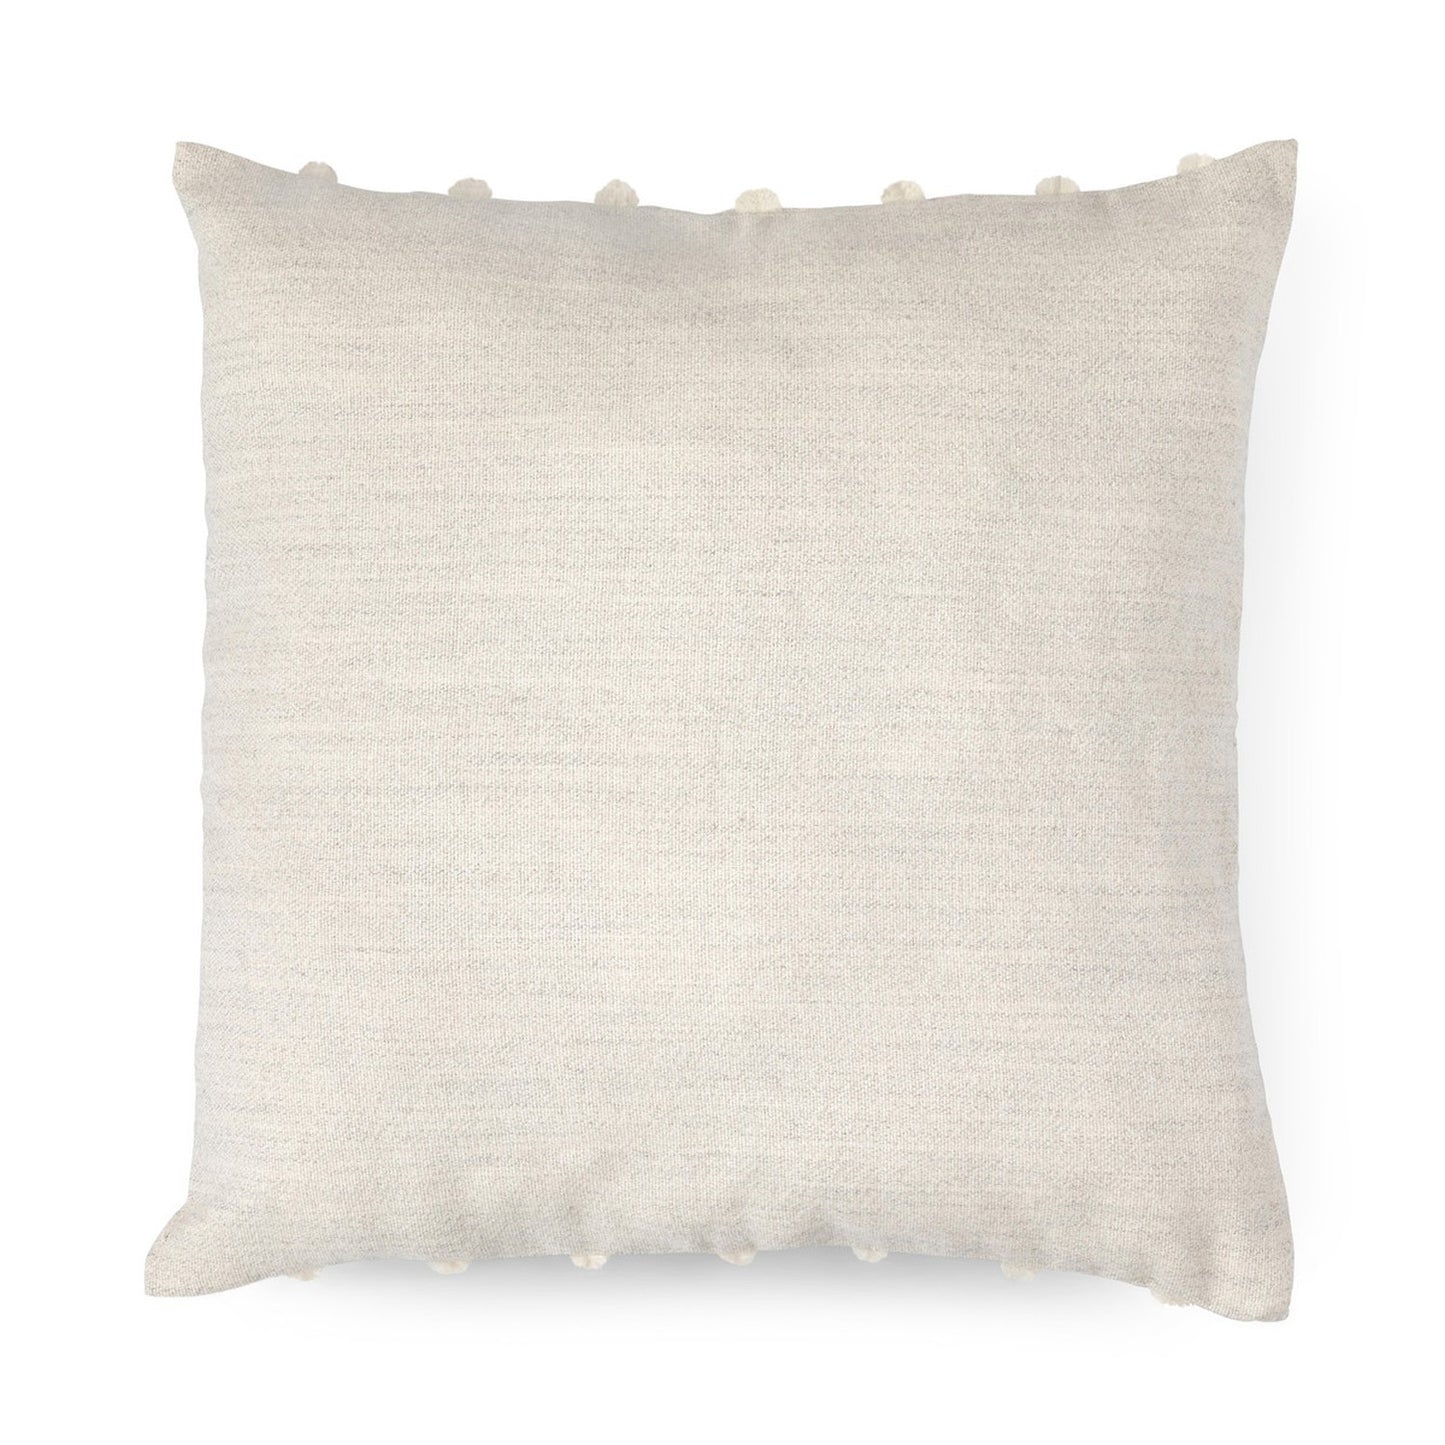 Park Hill Collection Urban Living Texture Stripe Alpaca Wool Square Pillow Cover